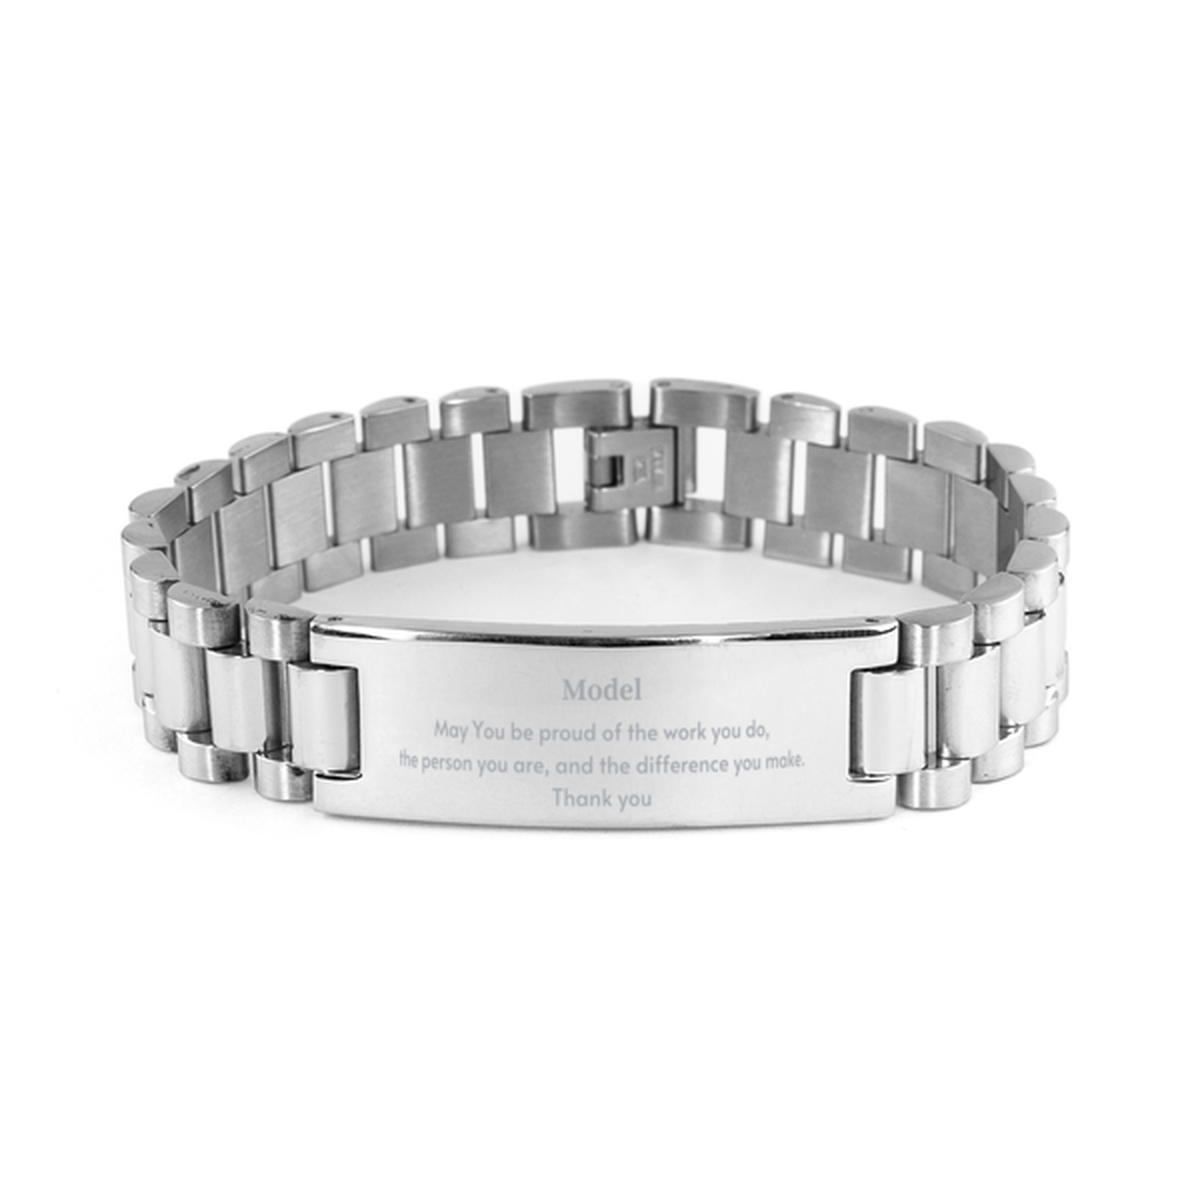 Heartwarming Ladder Stainless Steel Bracelet Retirement Coworkers Gifts for Model, Model May You be proud of the work you do, the person you are Gifts for Boss Men Women Friends